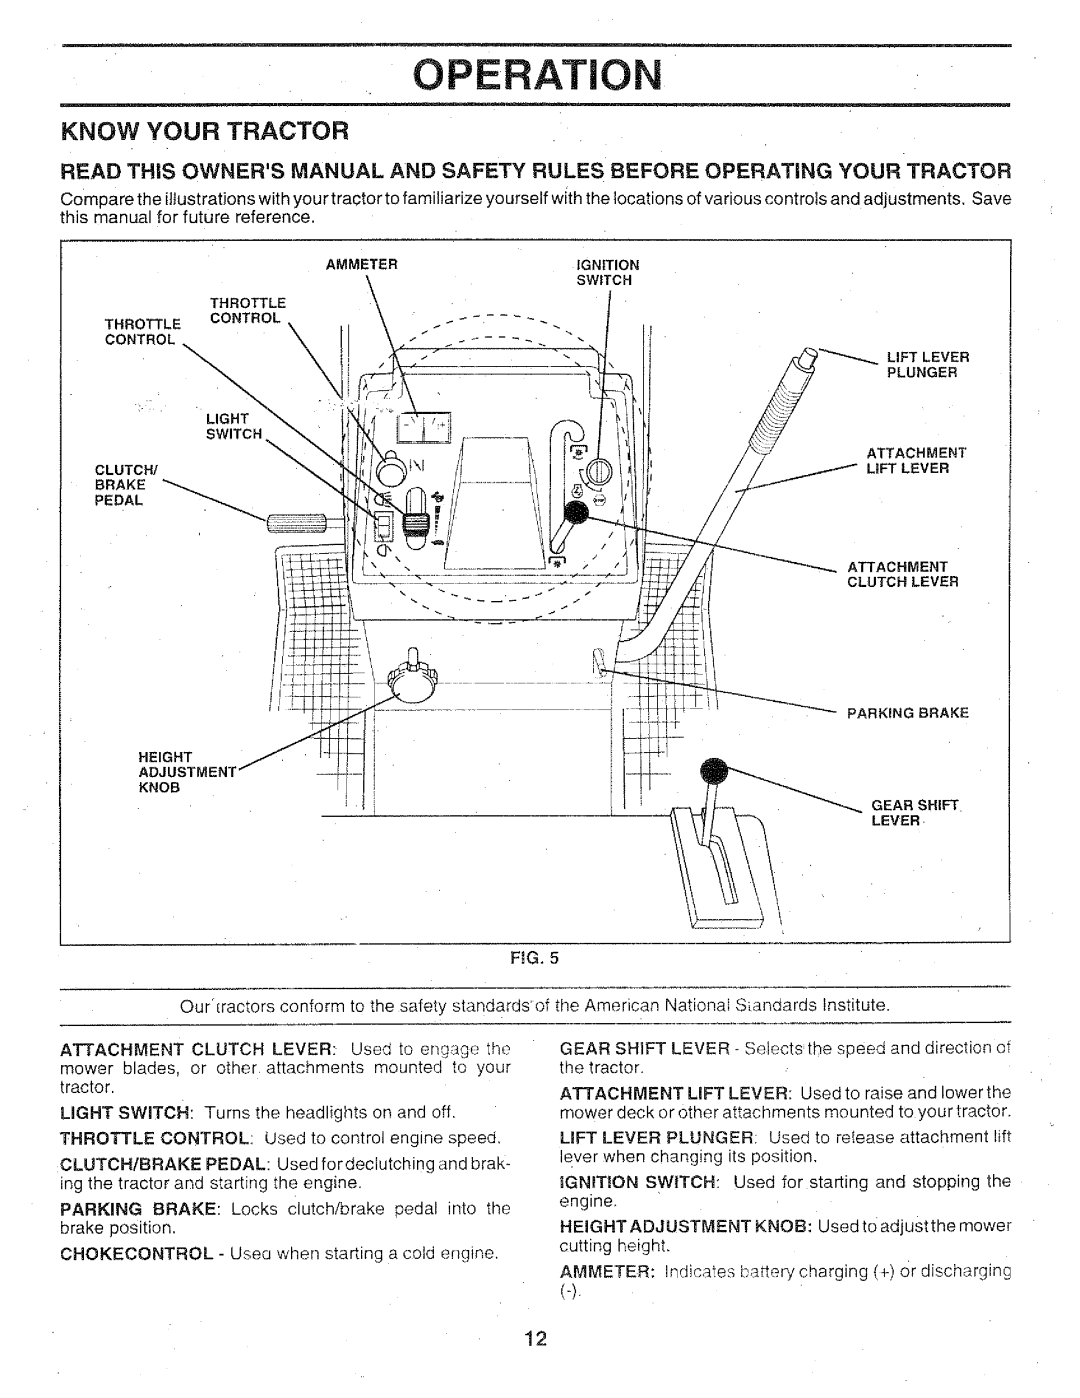 Sears 917.25147 owner manual Know Your Tractor, Operation 